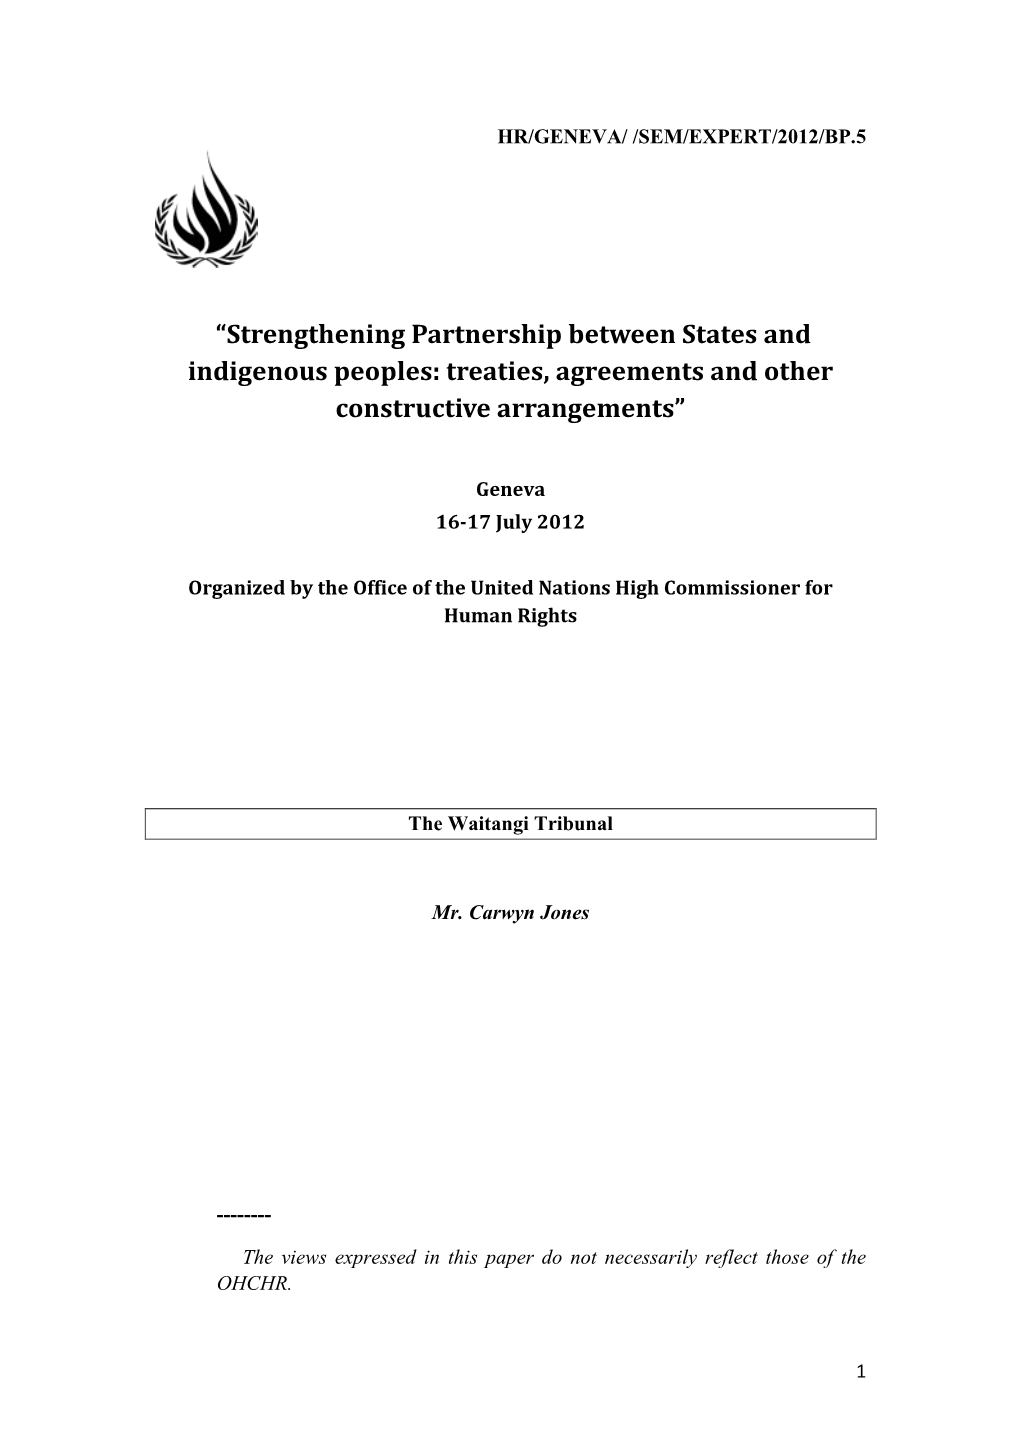 “Strengthening Partnership Between States and Indigenous Peoples: Treaties, Agreements and Other Constructive Arrangements”